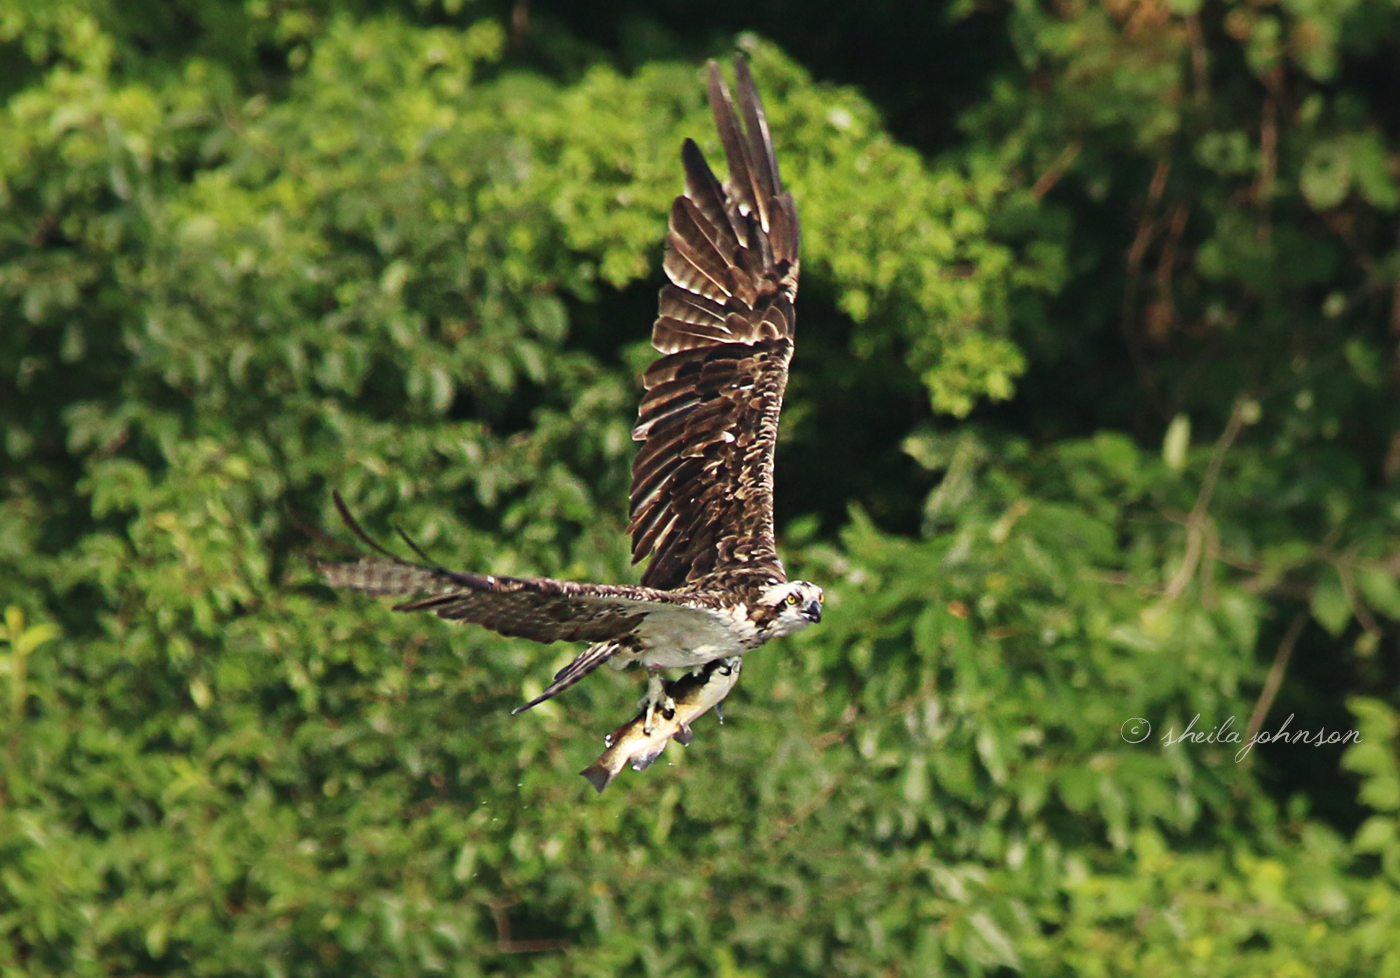 Following The One-Handed Fish Grab, This Osprey Surveys The Area, Presumably Looking For Would-Be Thieves.